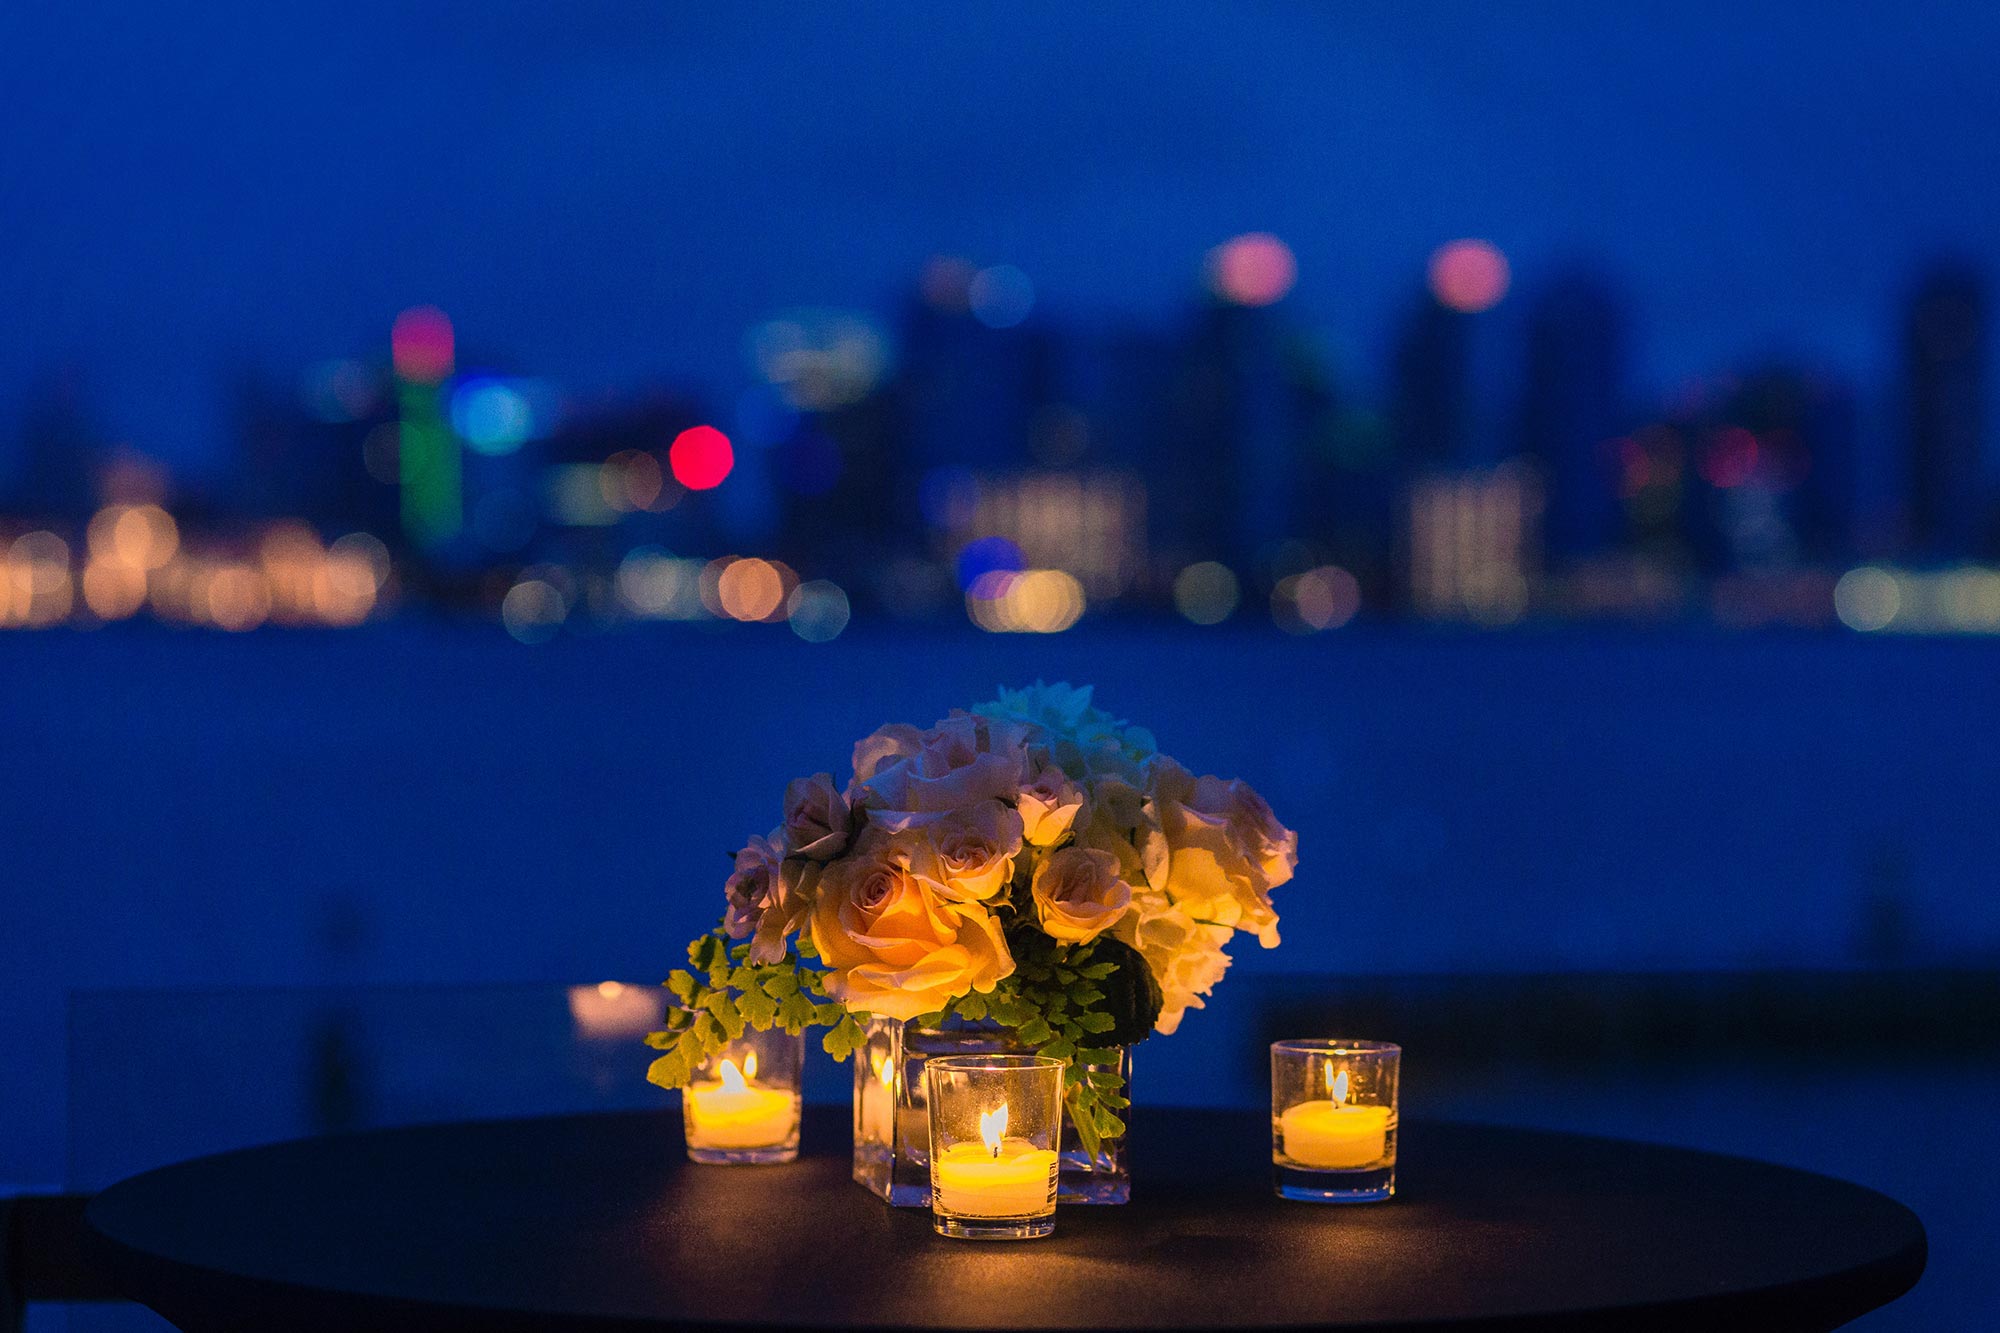 Romantic candlelit dinner with roses overlooking San Diego bay and skyline at dusk